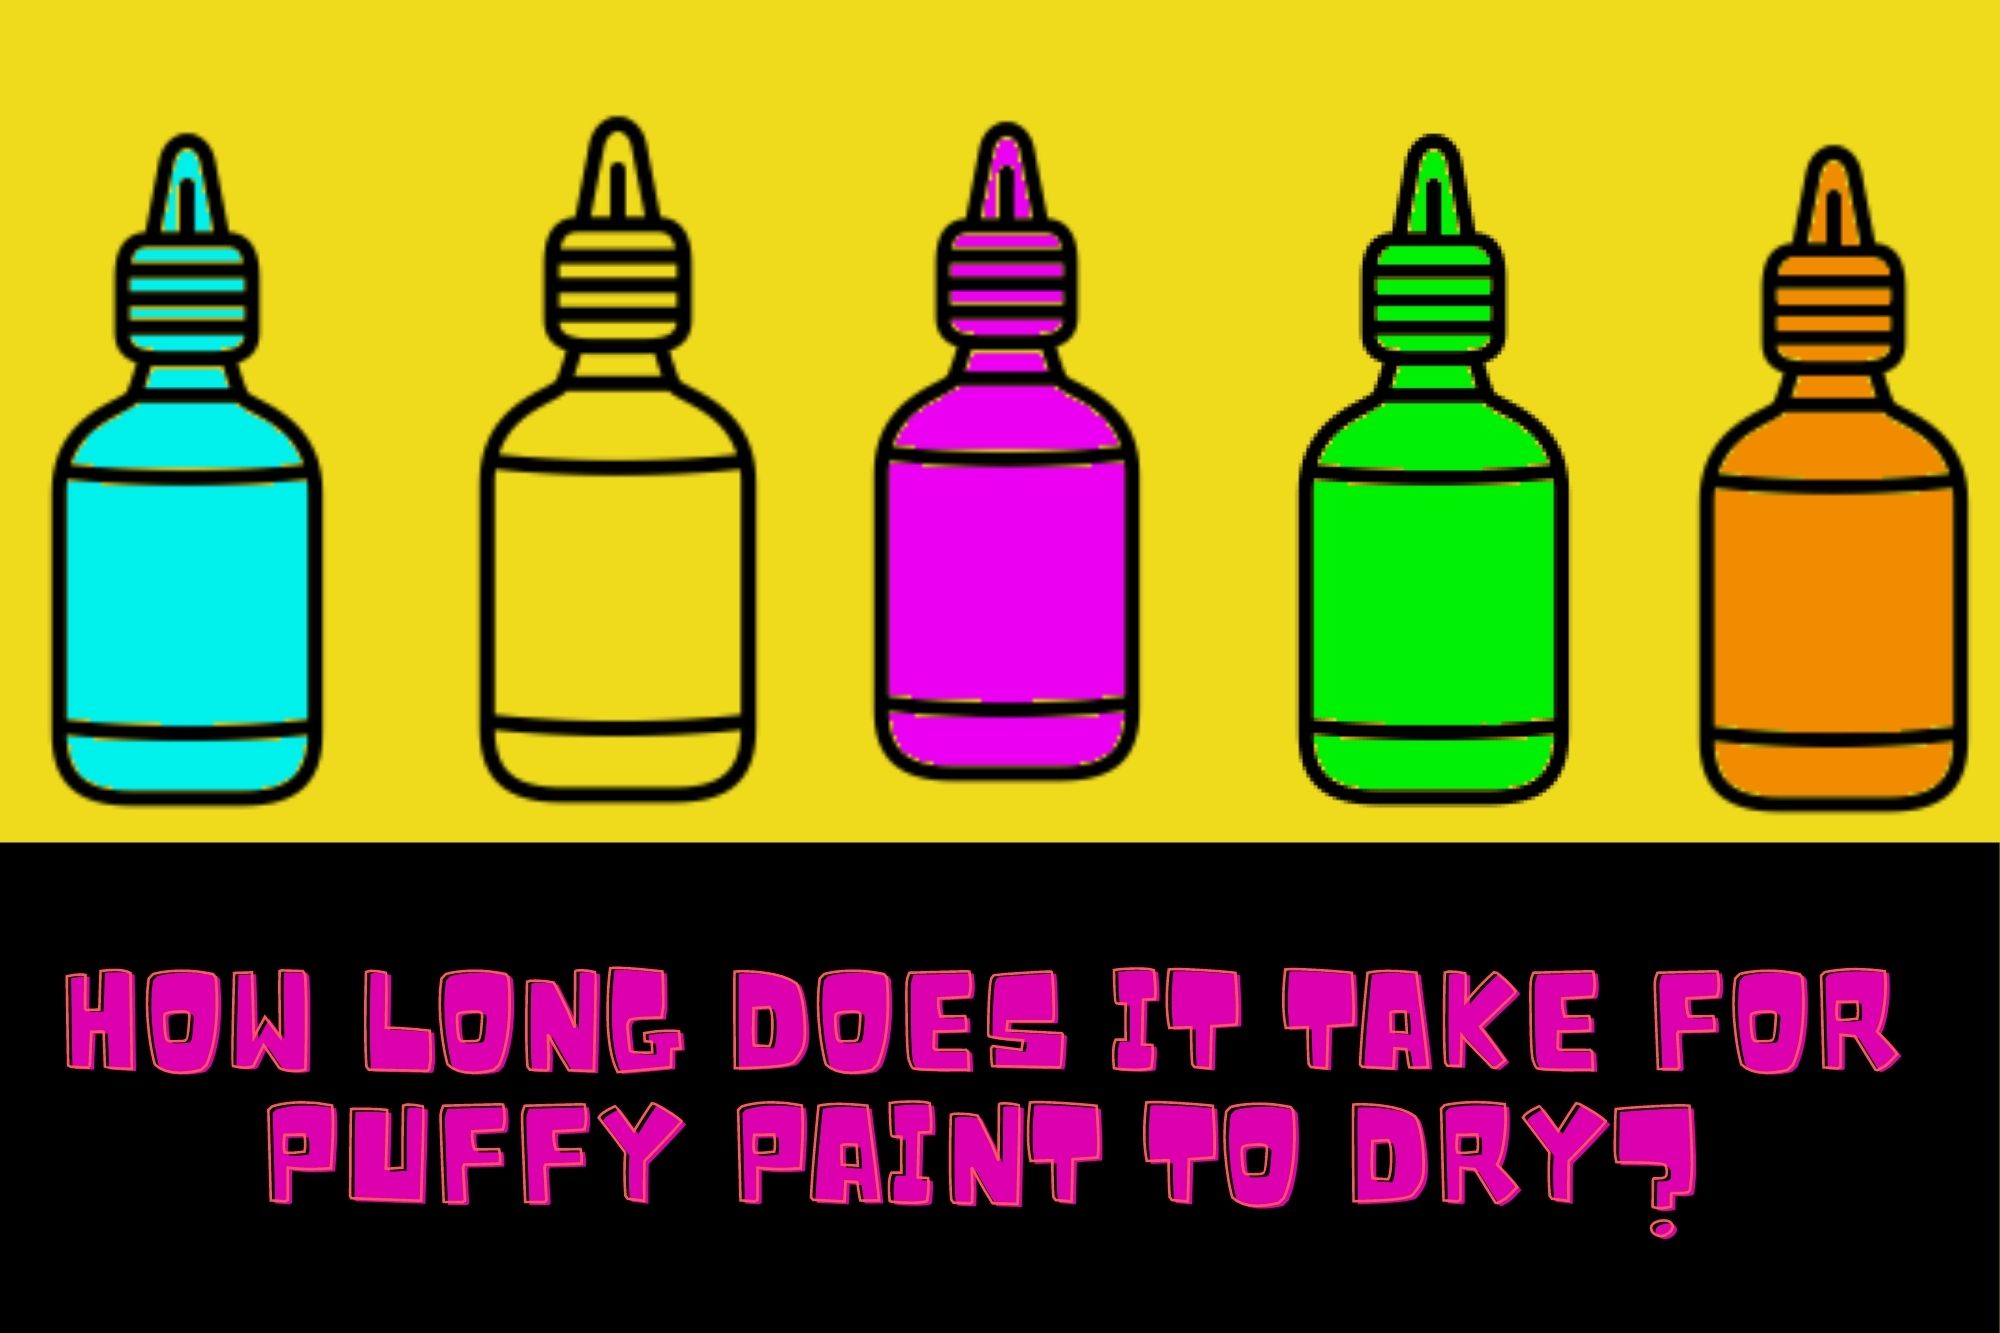 How Long Does It Take For Puffy Paint To Dry?